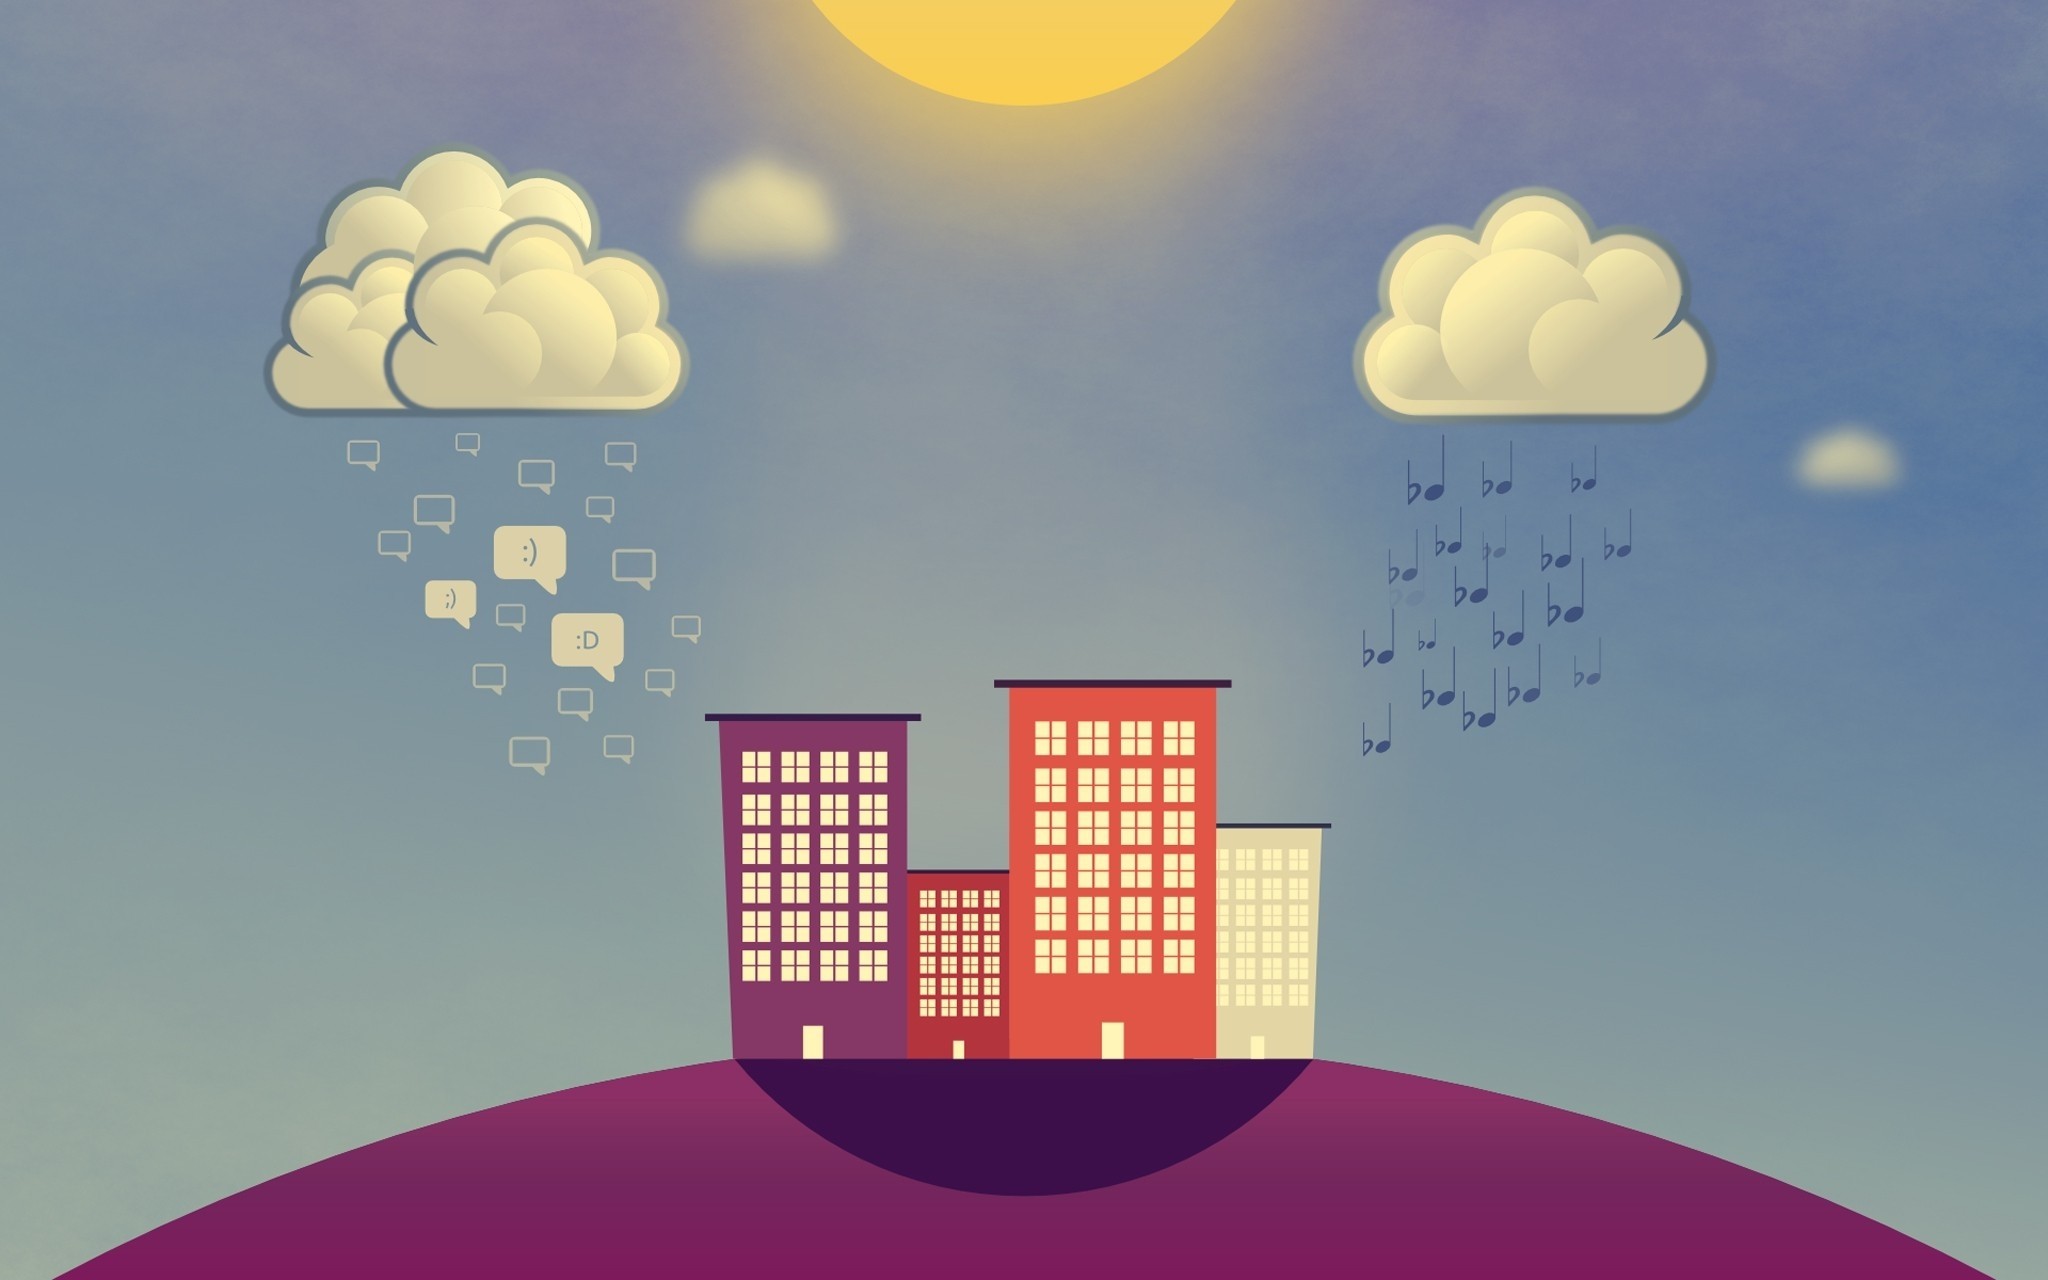 Download background music, rain, clouds, vector, building, notes, smilies, smiles